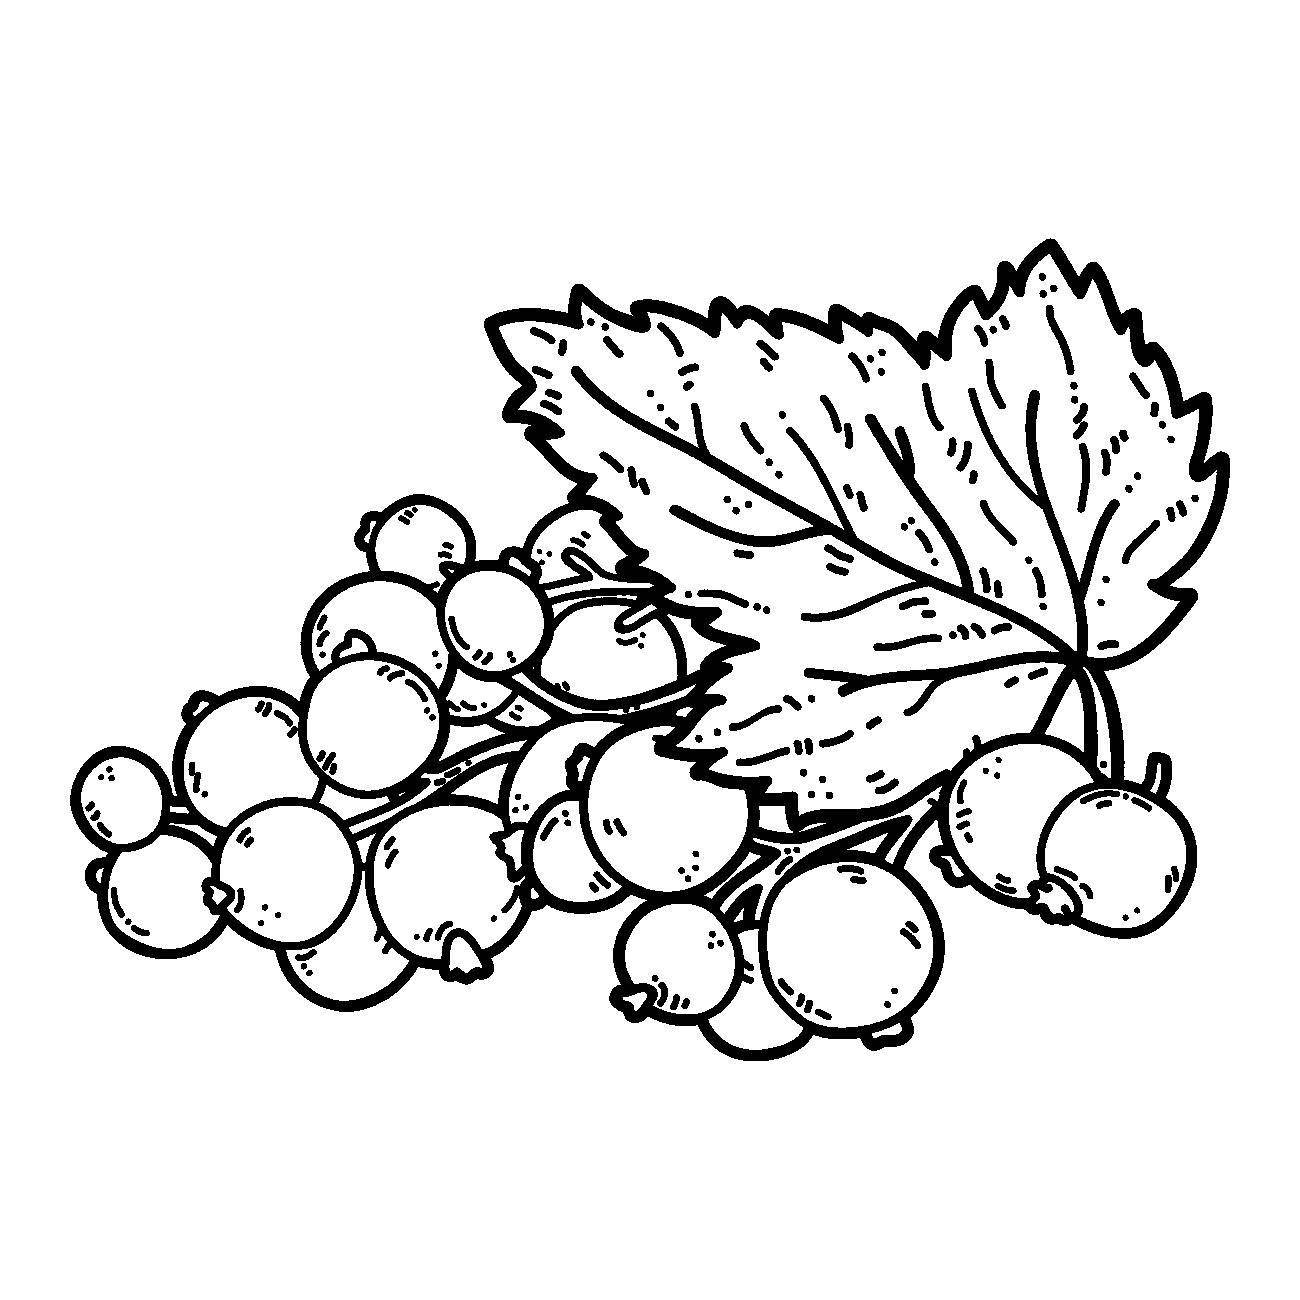 Coloring Figure currants. Category berries. Tags:  berries.